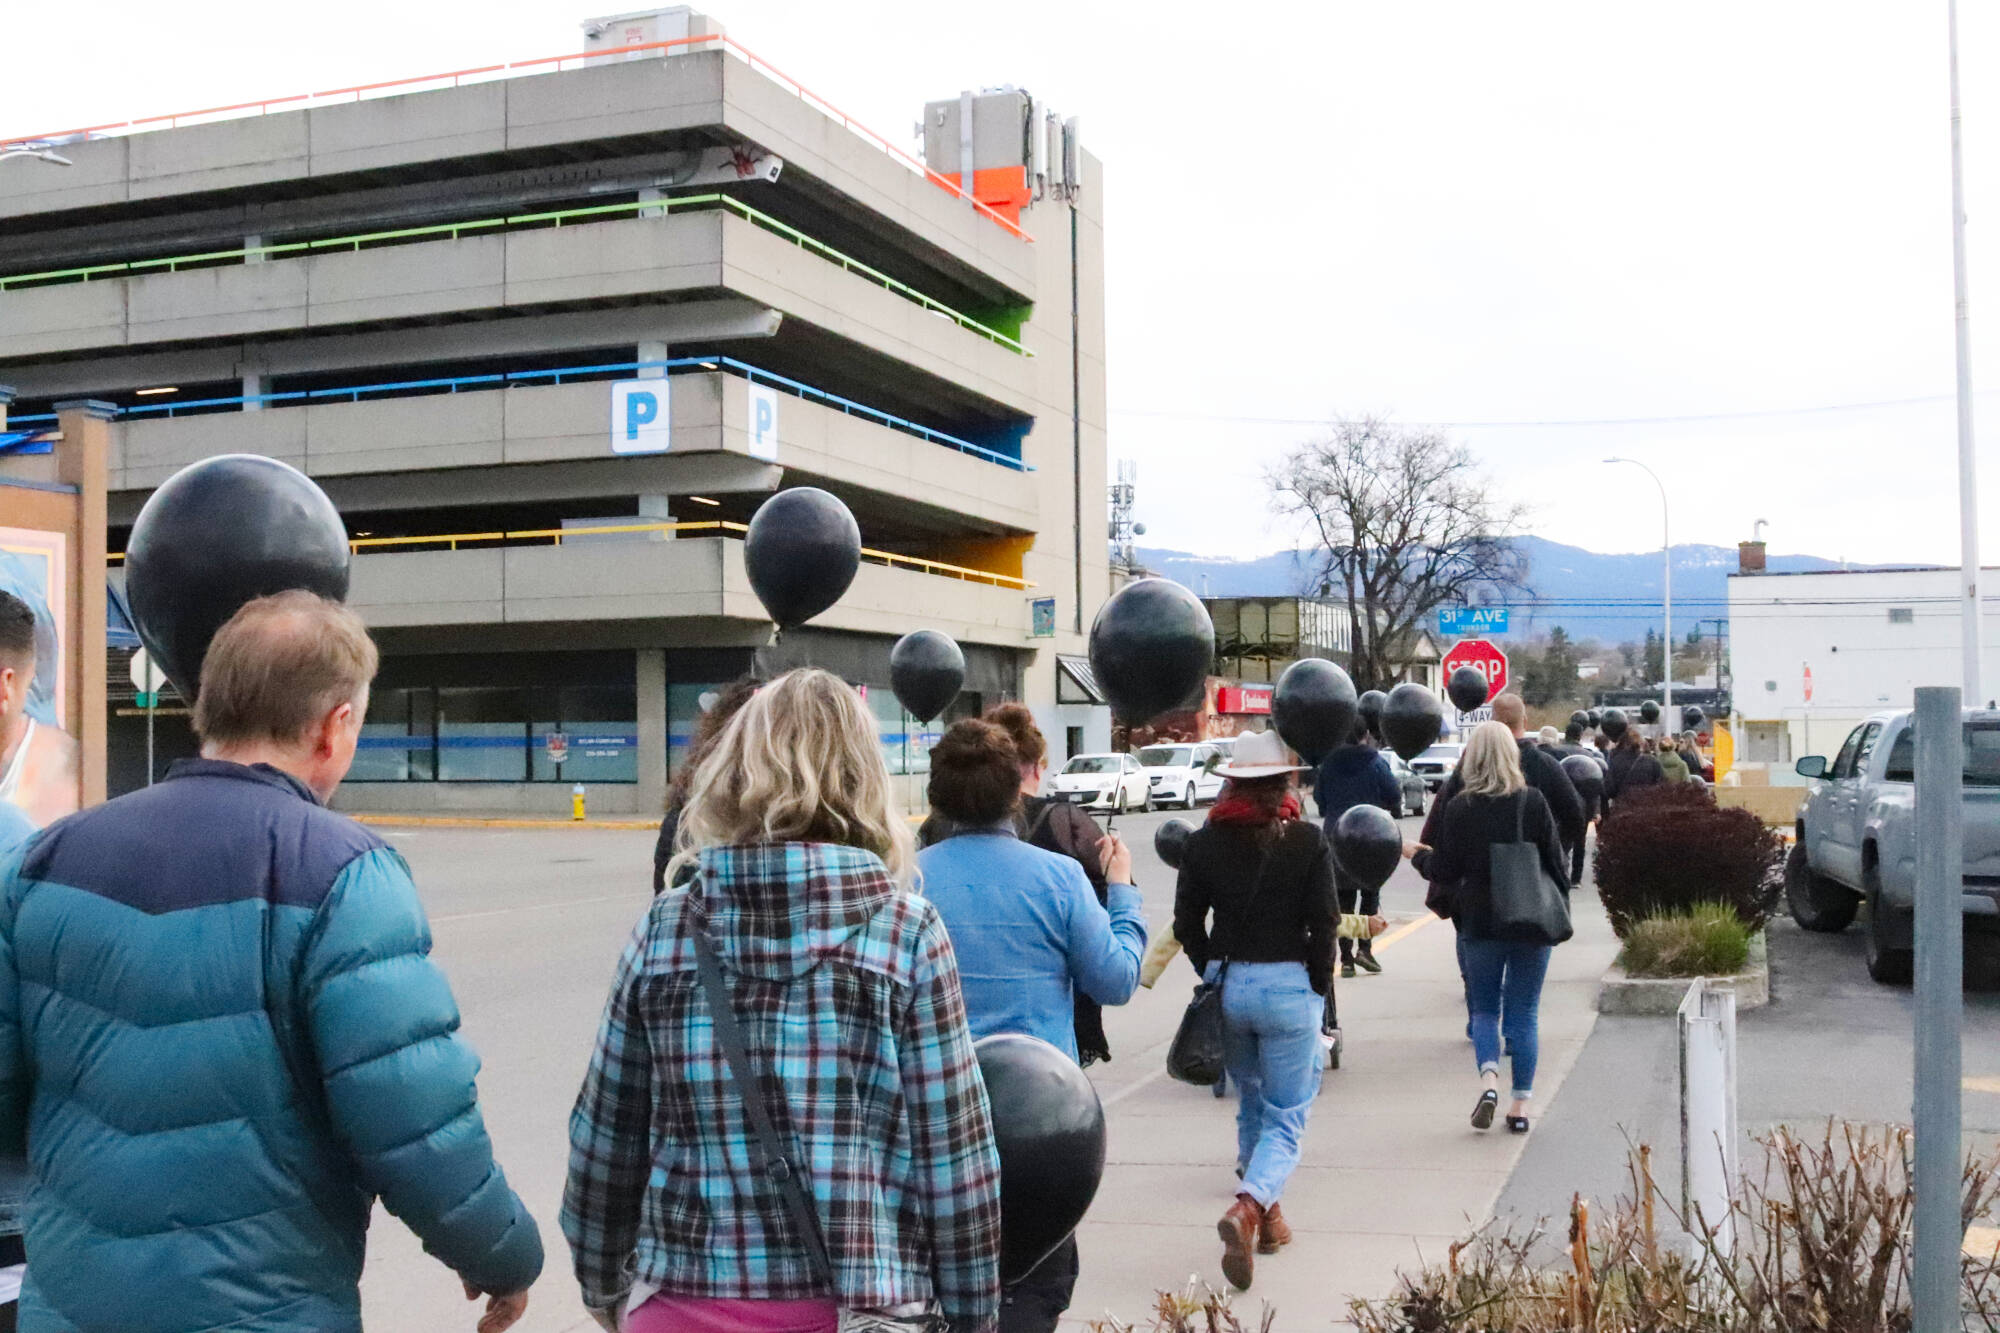 Members of the public walked through Vernon holding black balloons to raise awareness about overdoses and harm reduction on the sixth anniversary of B.C.’s declaration of the opioid crisis Thursday, April 14, 2022. (Brendan Shykora - Morning Star)